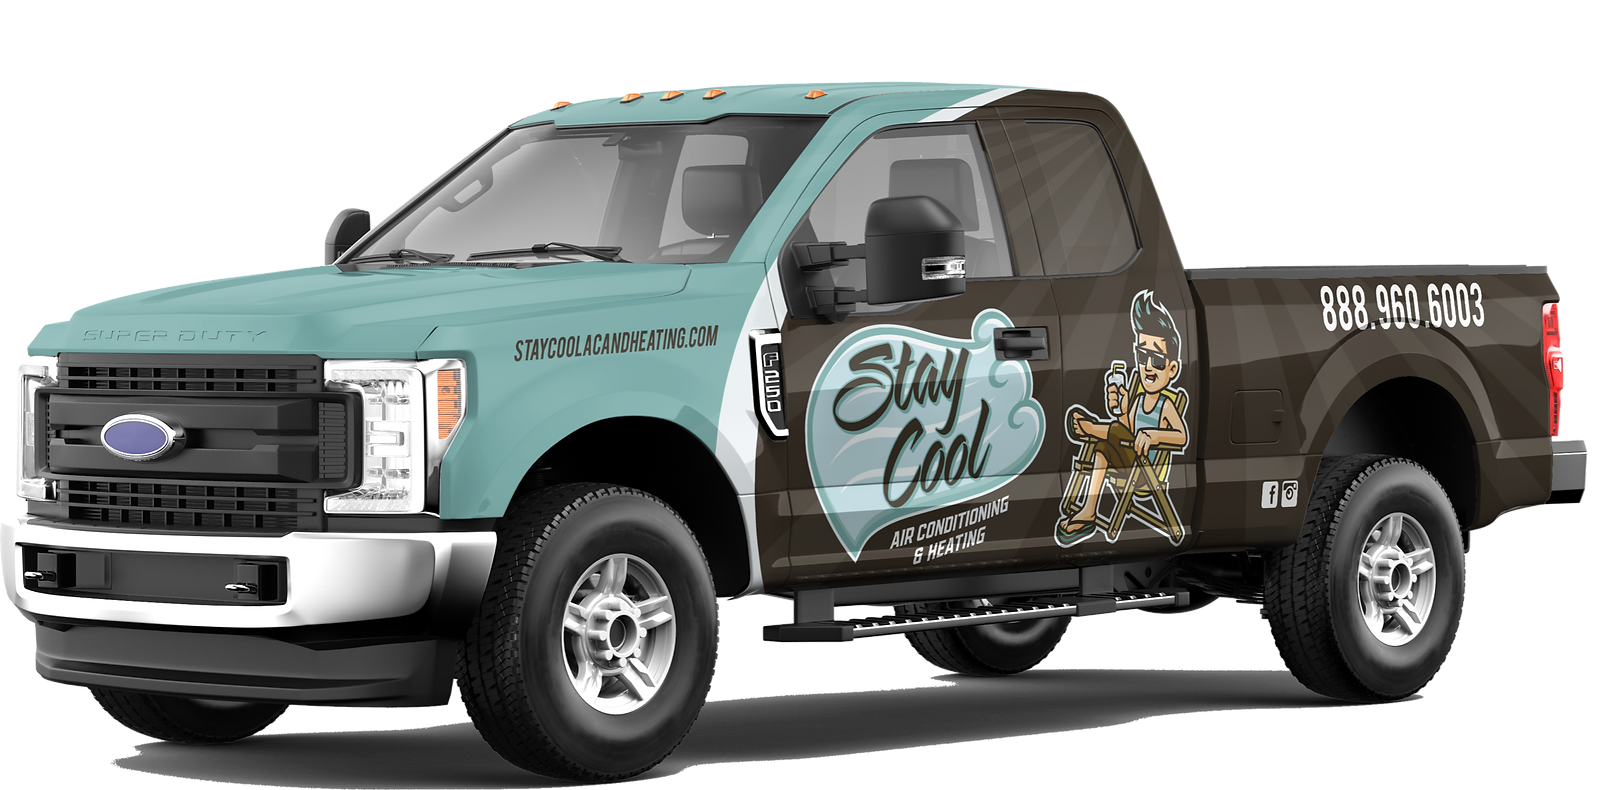 Full Wrap Truck with the logo and name of Stay Cool company, an example of vehicle wrap services.